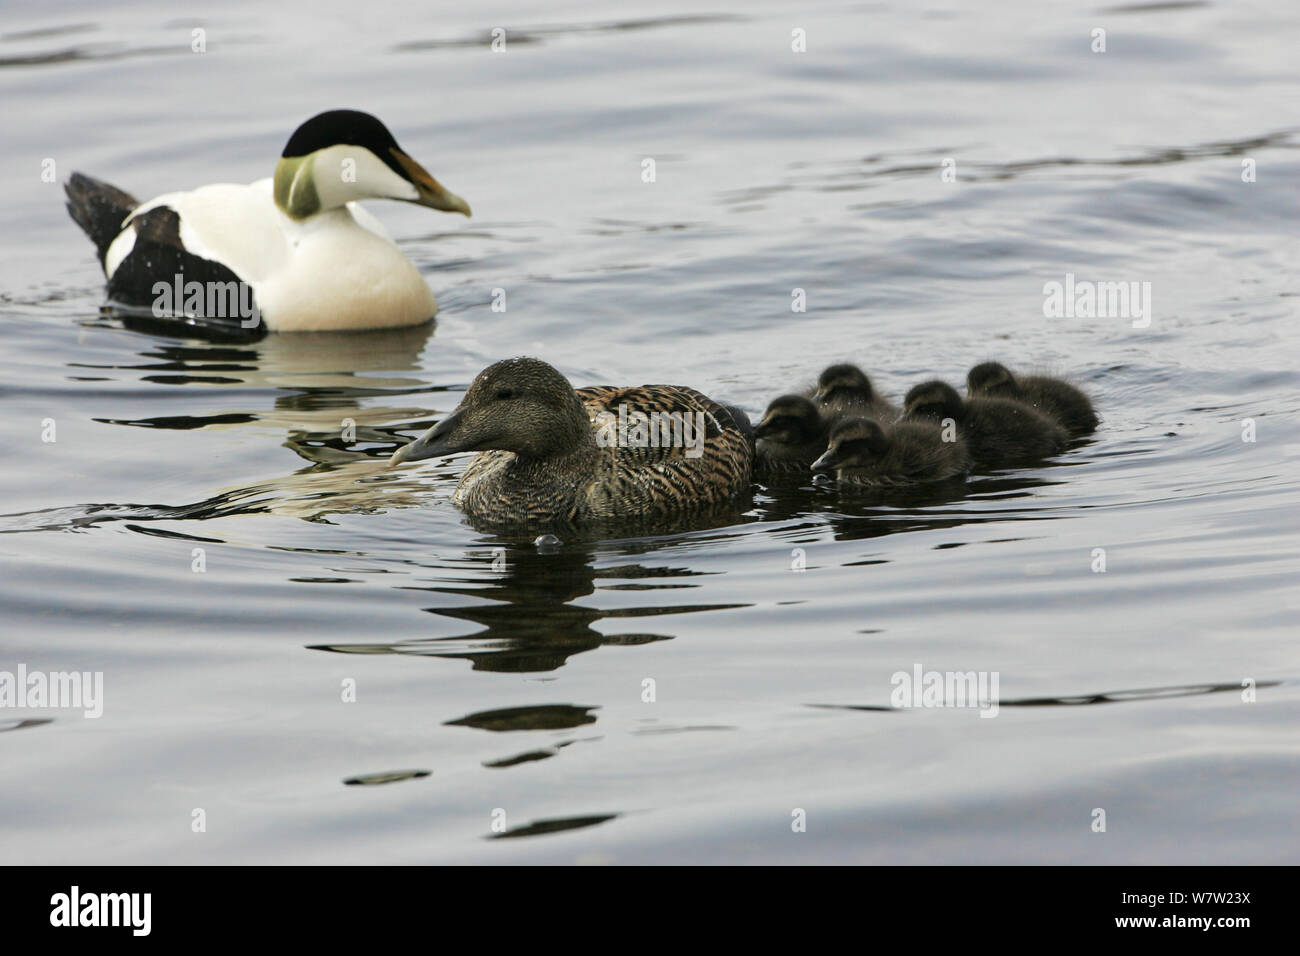 Common eider (Somateria mollissima) male and female with ducklings on Loch Scridain, Isle of Mull Argyll and Bute, Scotland, UK, May. Stock Photo